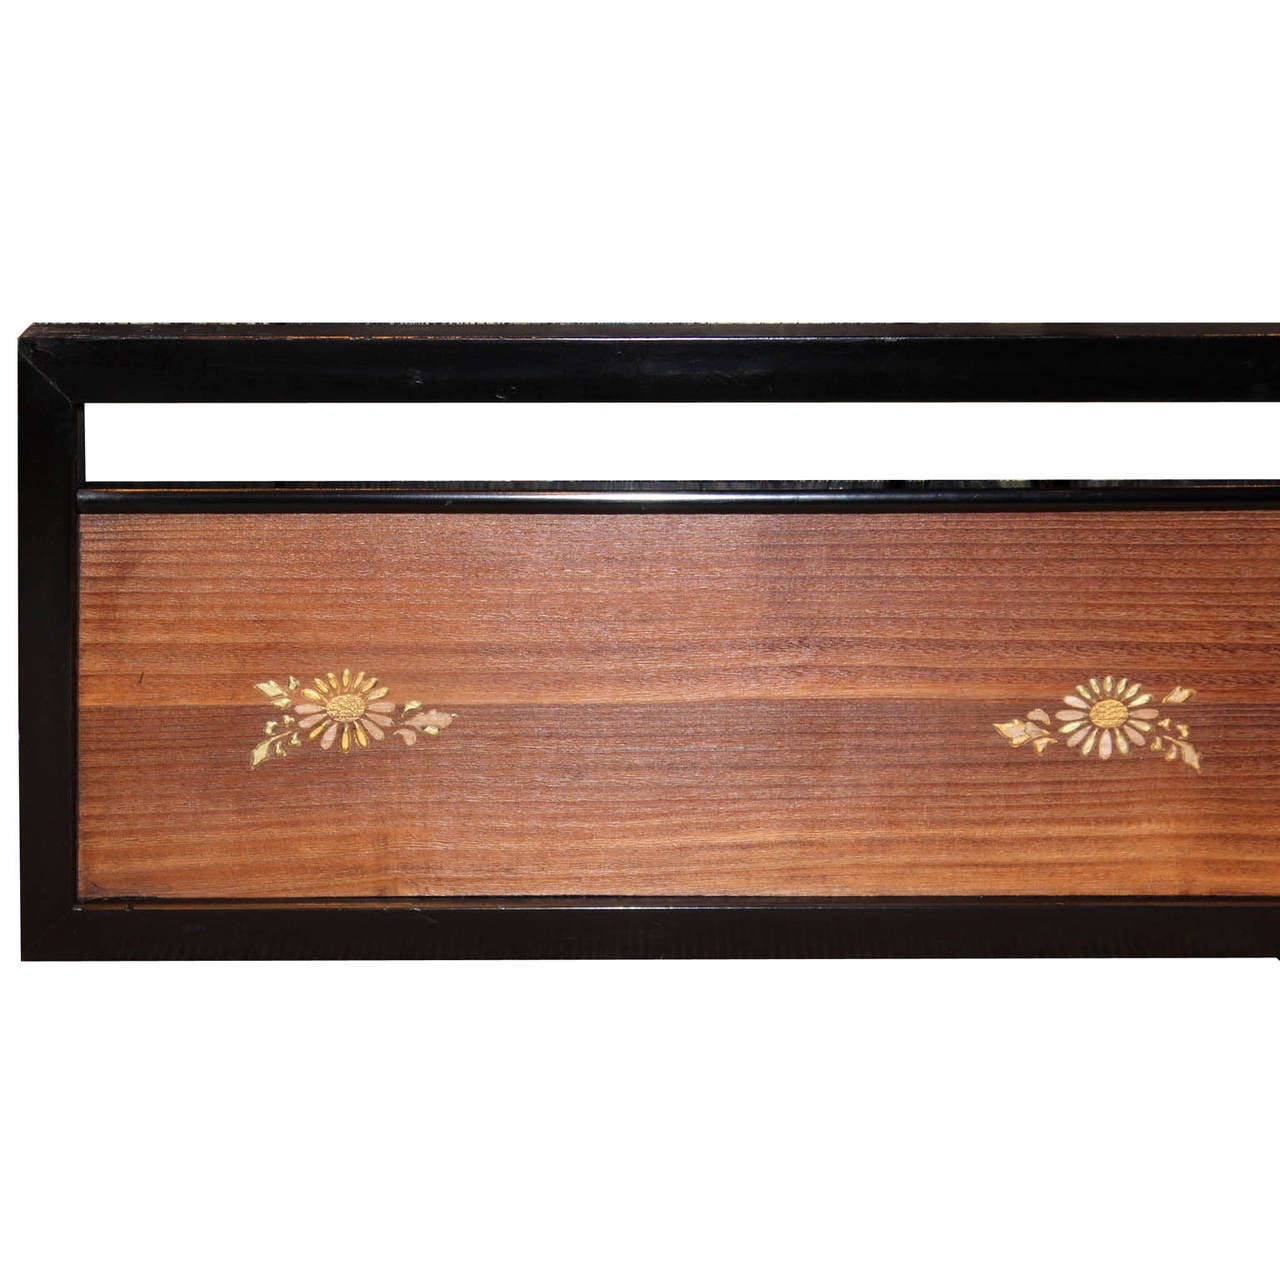 Japanese kiriwood ranma (transom) with hand-painted chrysanthemums represents the royal family, sun, perfection, and longevity. Display as an art piece or use as headboard. Transoms were originally used in between rooms above doorways as decorative